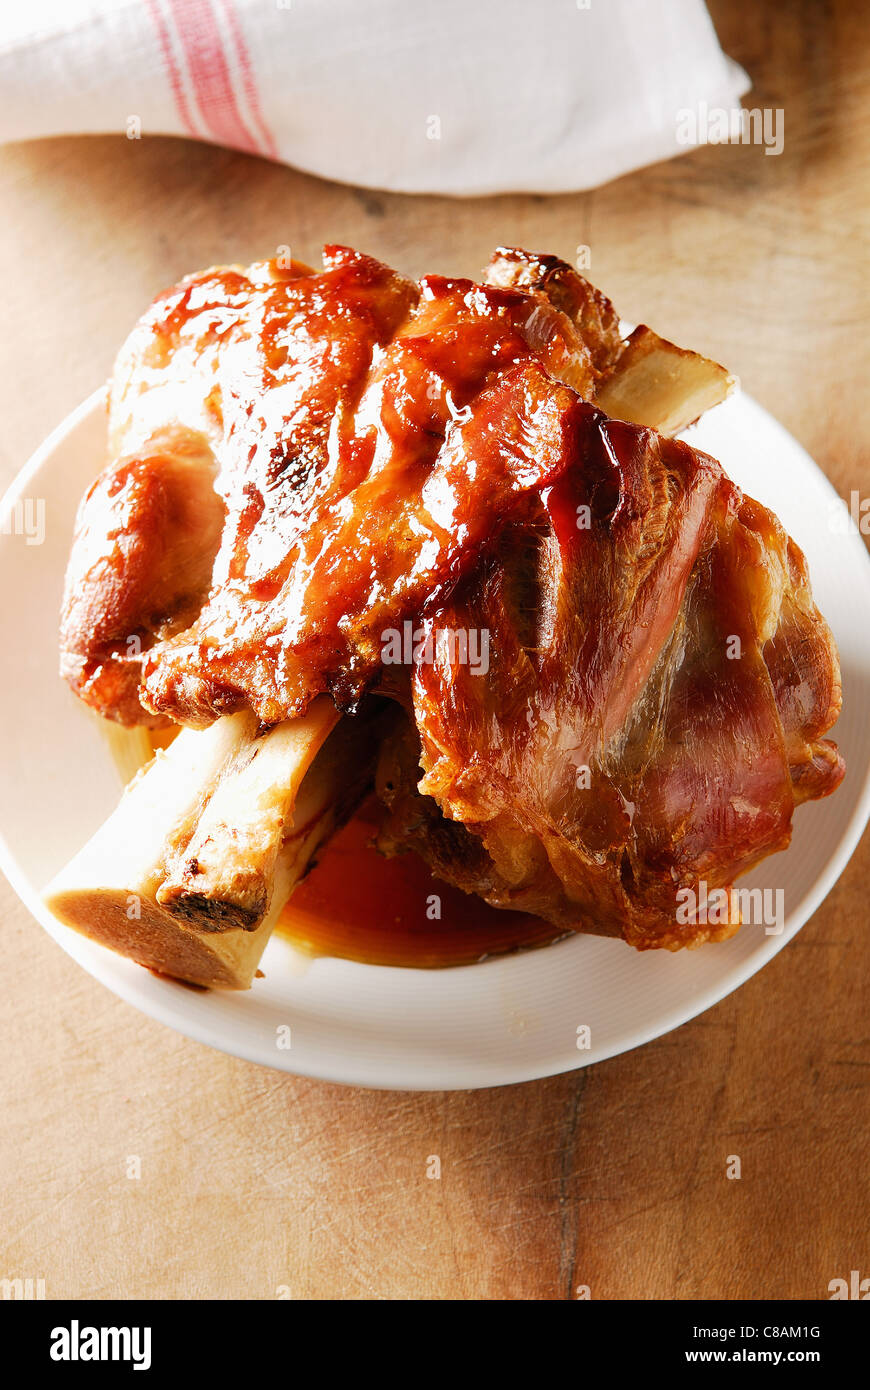 Confit knuckle of veal roast in a casserole dish Stock Photo